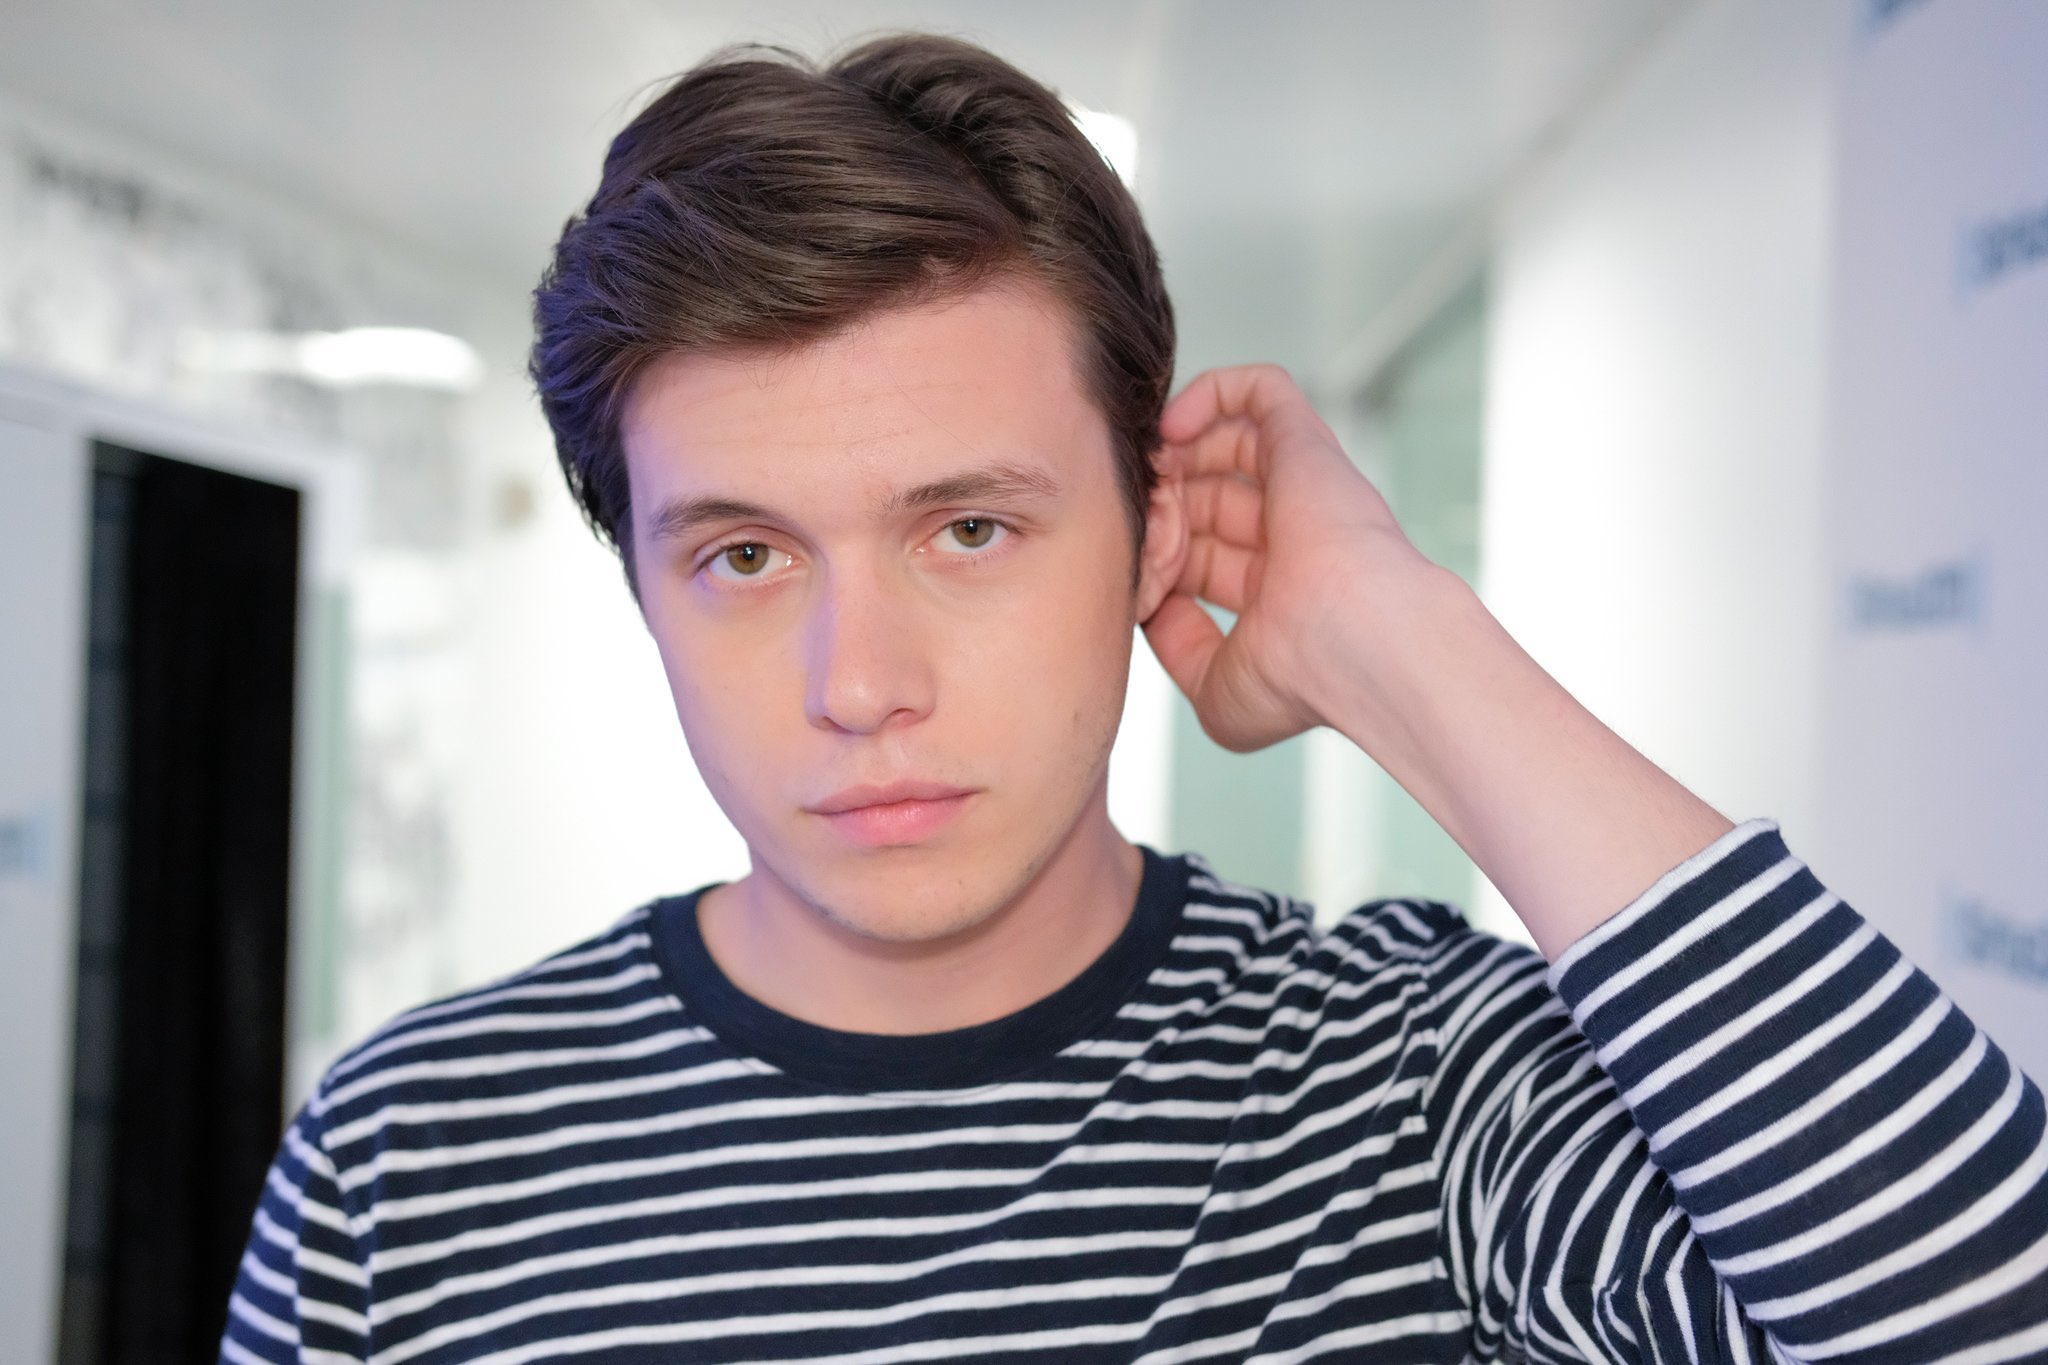 Happy birthday to the hunk that is nick robinson. king. 